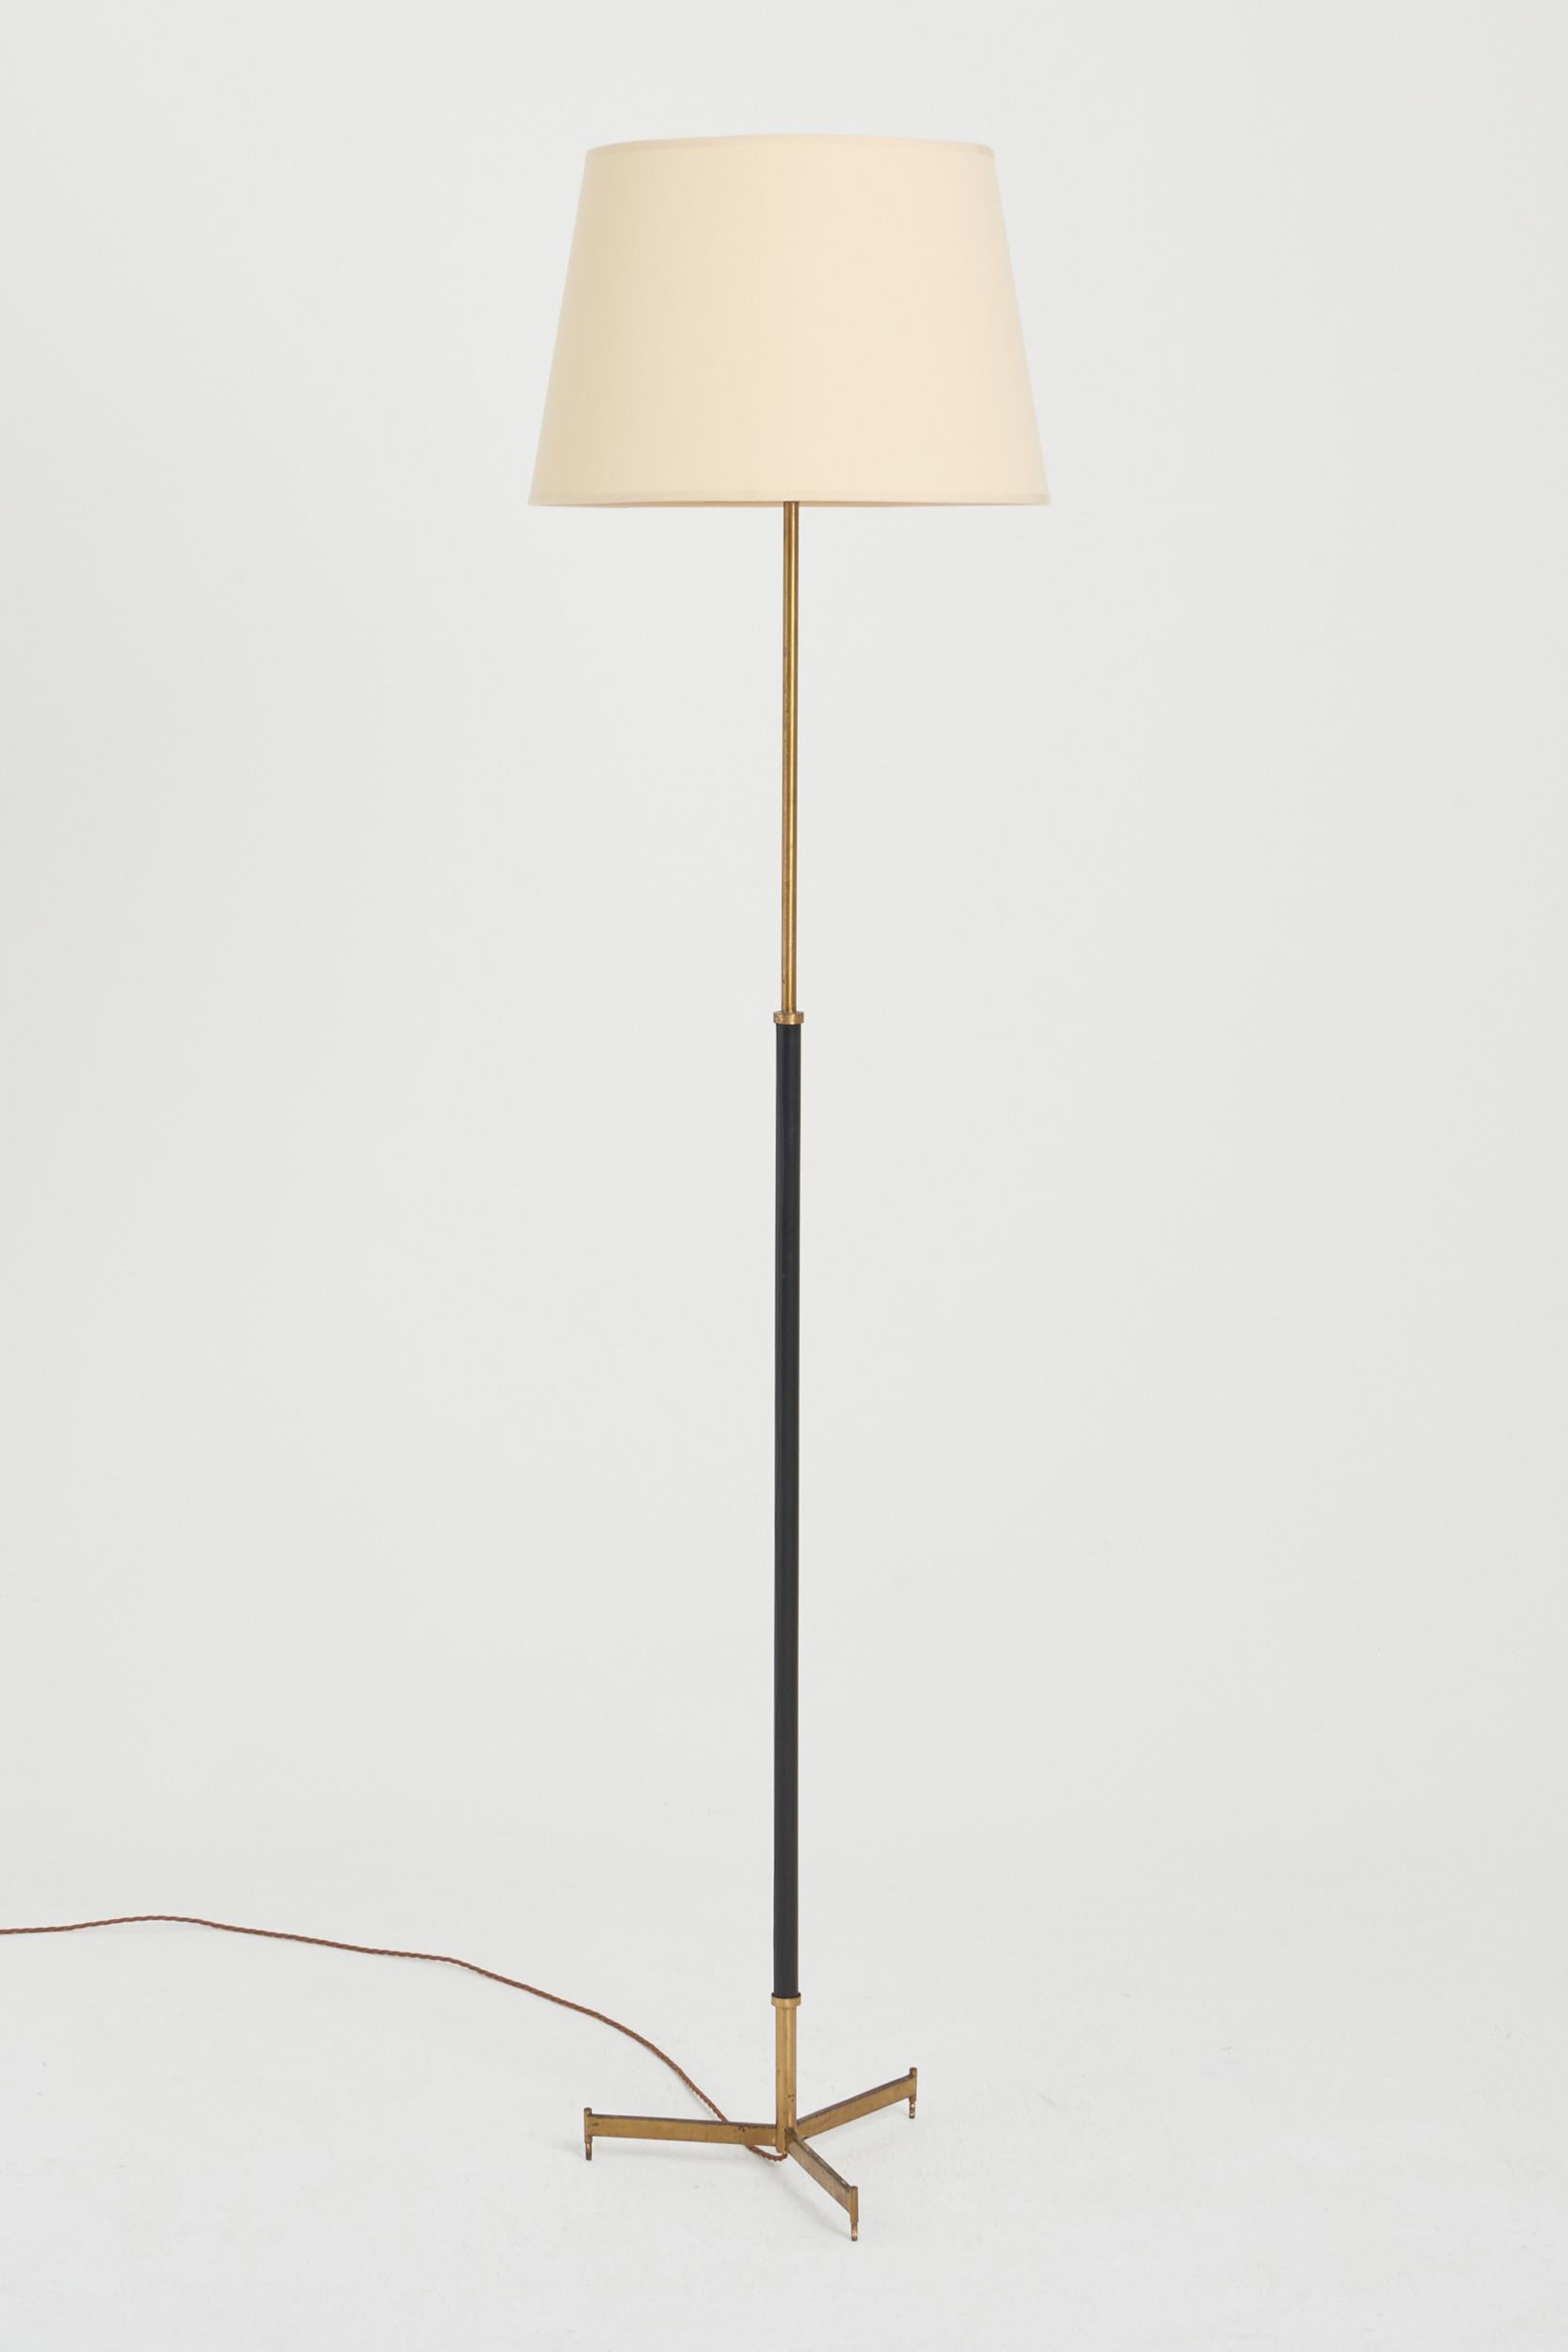 A brass and black faux leather floor lamp.
Spain, third quarter of the 20th Century.
With the shade: 182 cm high by 46 cm diameter
Lamp base only: 159 cm high by 33 cm diameter.